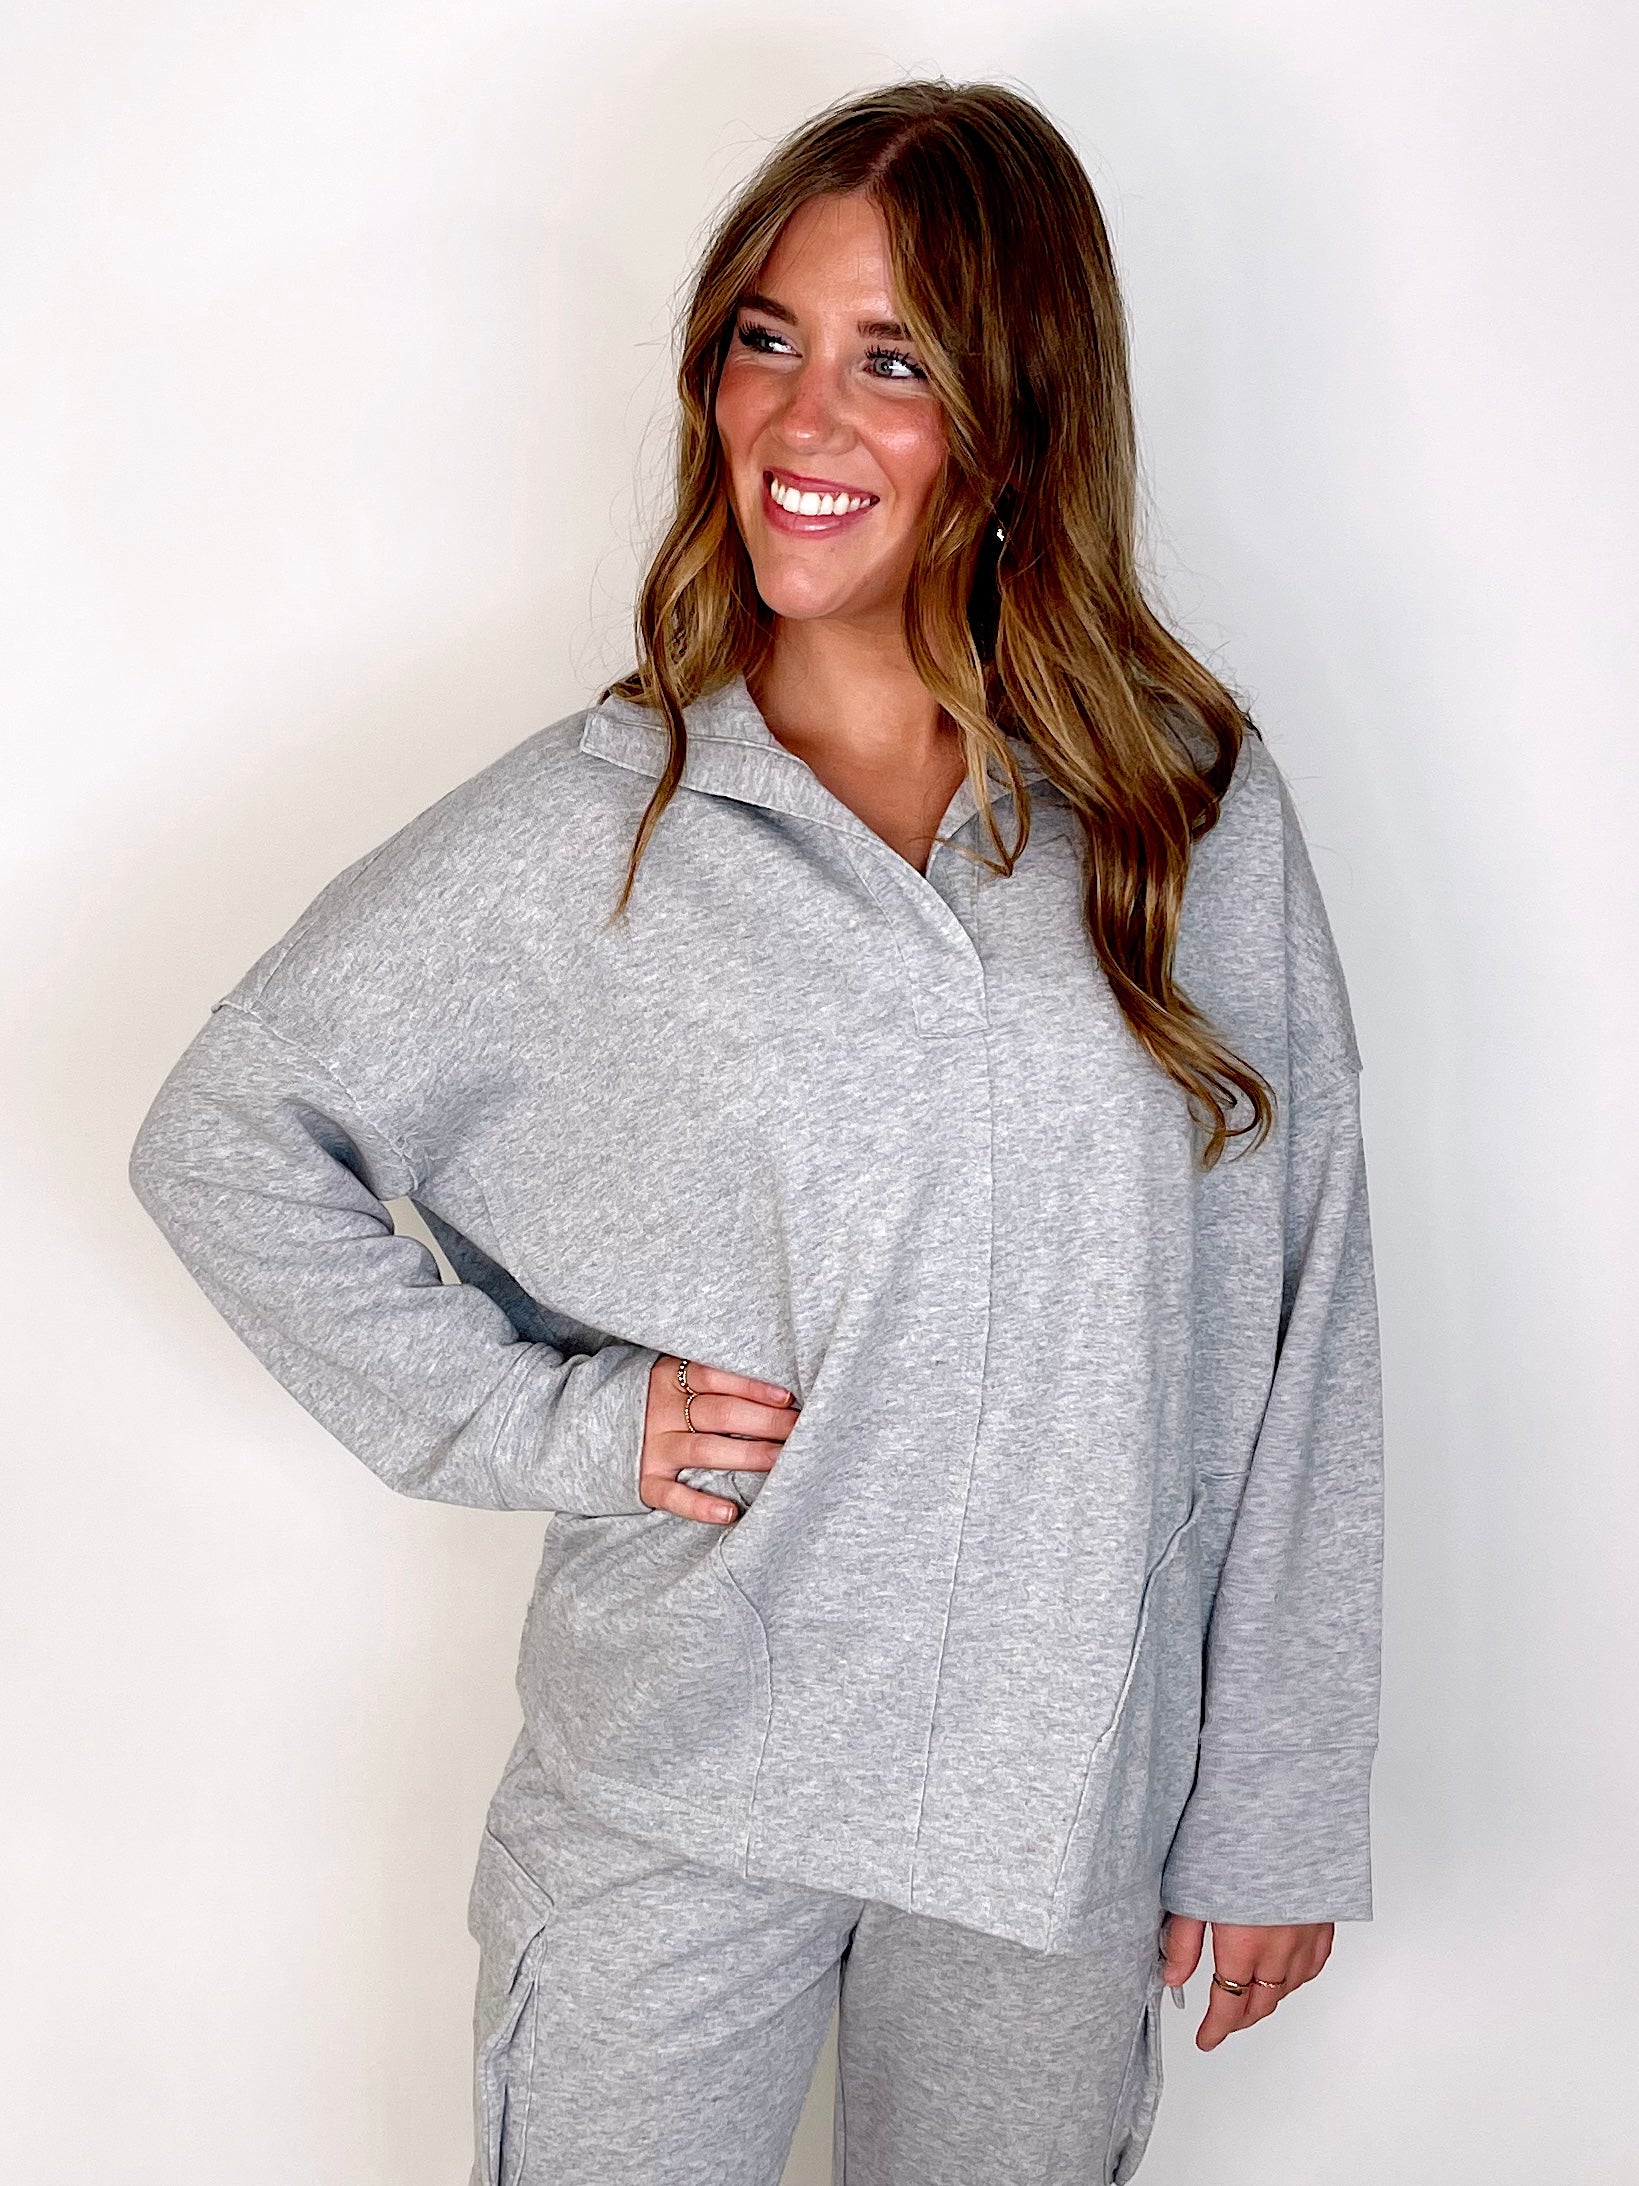 The Landyn Pullover-Pullover-Rae Mode-The Village Shoppe, Women’s Fashion Boutique, Shop Online and In Store - Located in Muscle Shoals, AL.